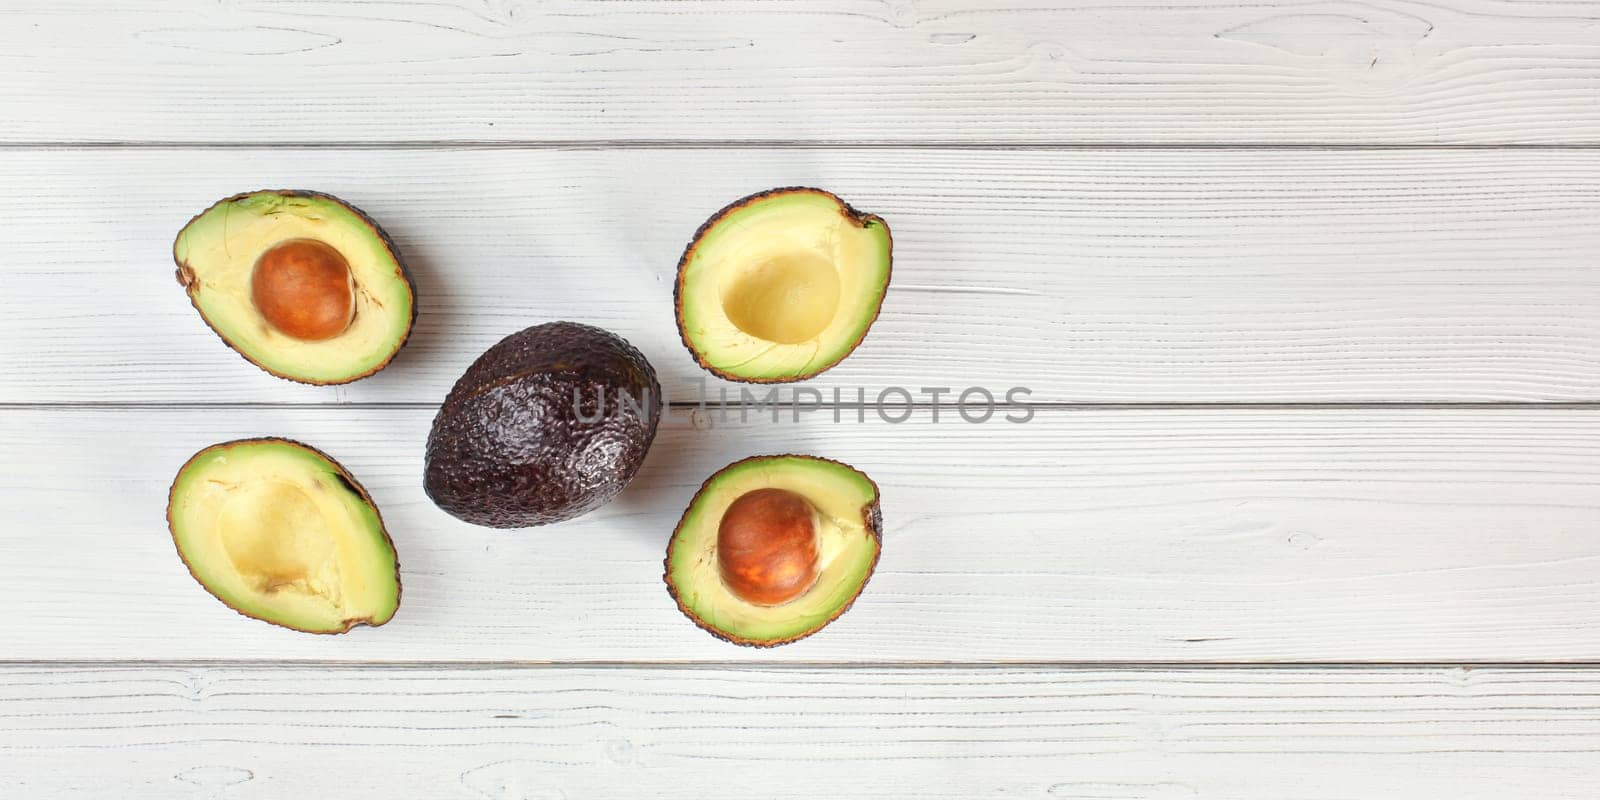 Ripe brown avocado - Hass bilse variety - halved and arranged on white boards desk, view from above, space for text right side